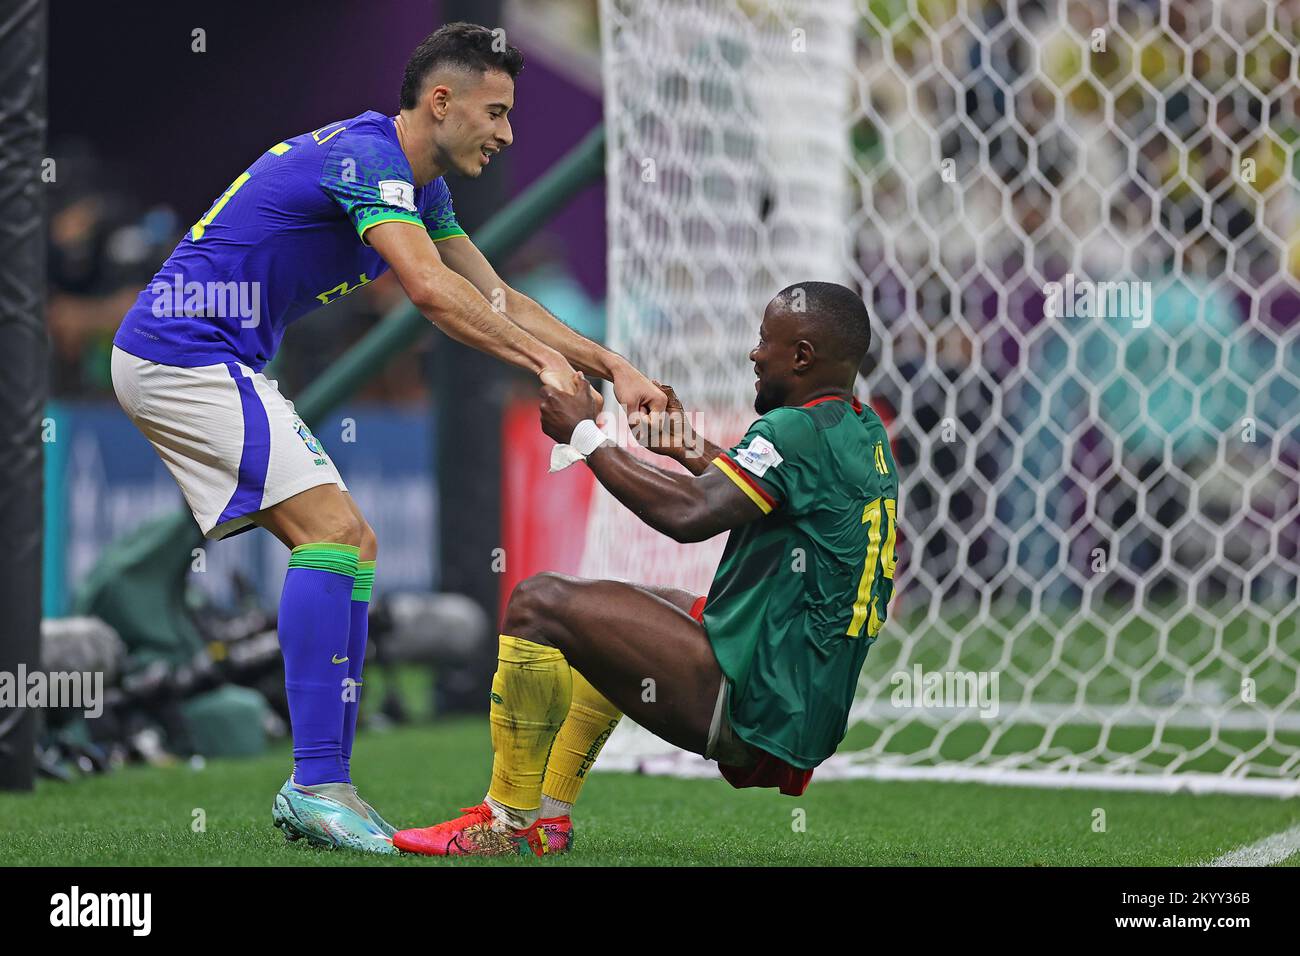 Doha, Qatar. 02nd Dec, 2022. Collins Fai of Cameroon receives help from Gabriel Martinelli of Brazil, during the match between Cameroon and Brazil, for the 3rd round of Group G of the FIFA World Cup Qatar 2022, at Lusail Stadium, this Friday 02. 30761 (Heuler Andrey/SPP) Credit: SPP Sport Press Photo. /Alamy Live News Stock Photo